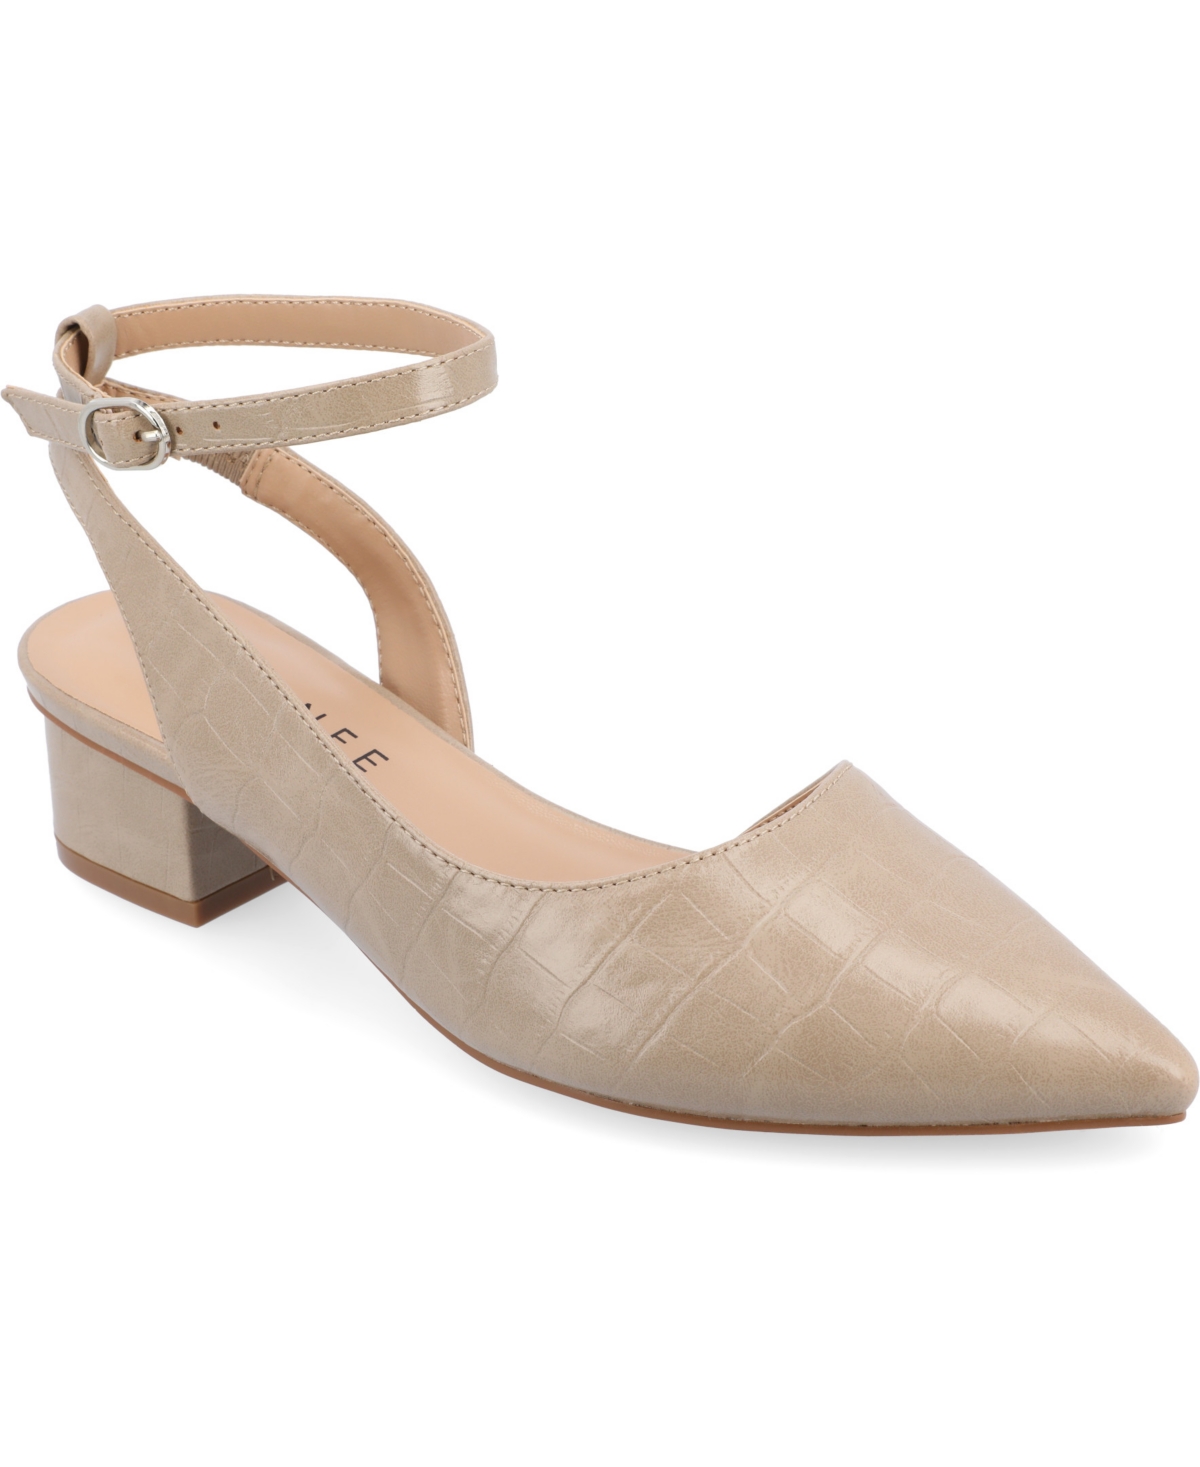 Women's Keefa Wide Width Ankle Strap Flats - Taupe